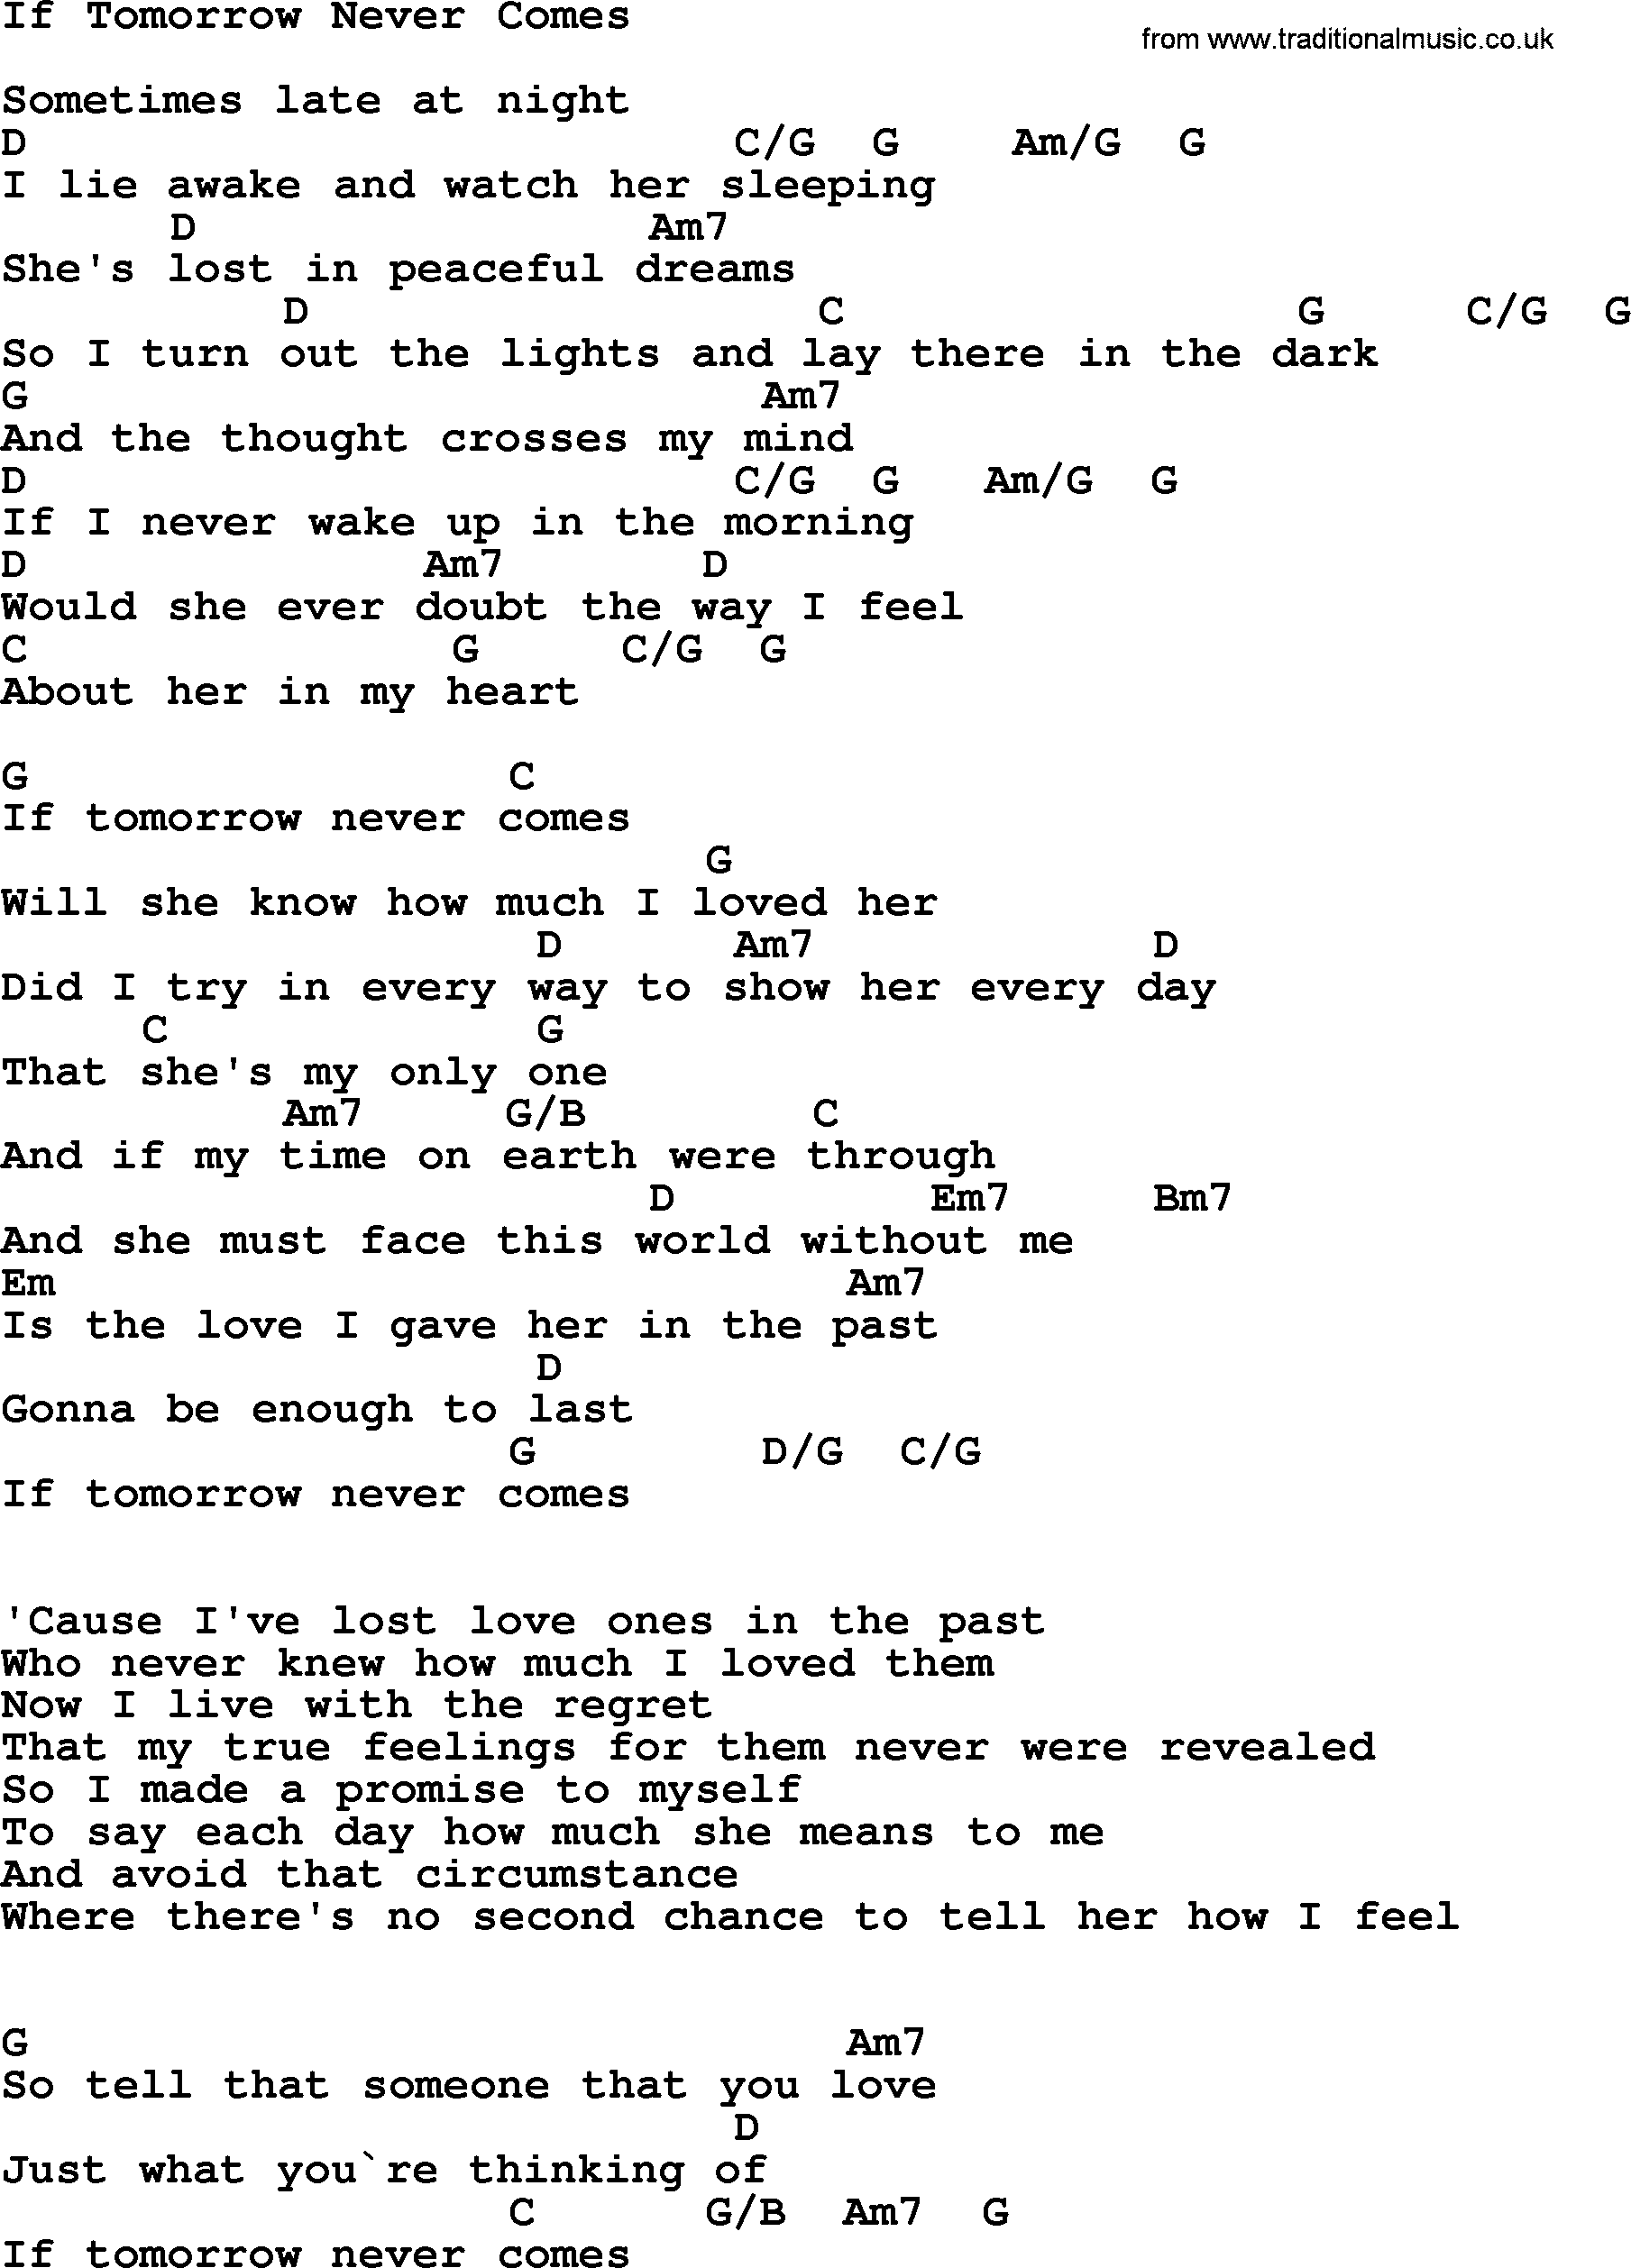 Garth Brooks song: If Tomorrow Never Comes, lyrics and chords